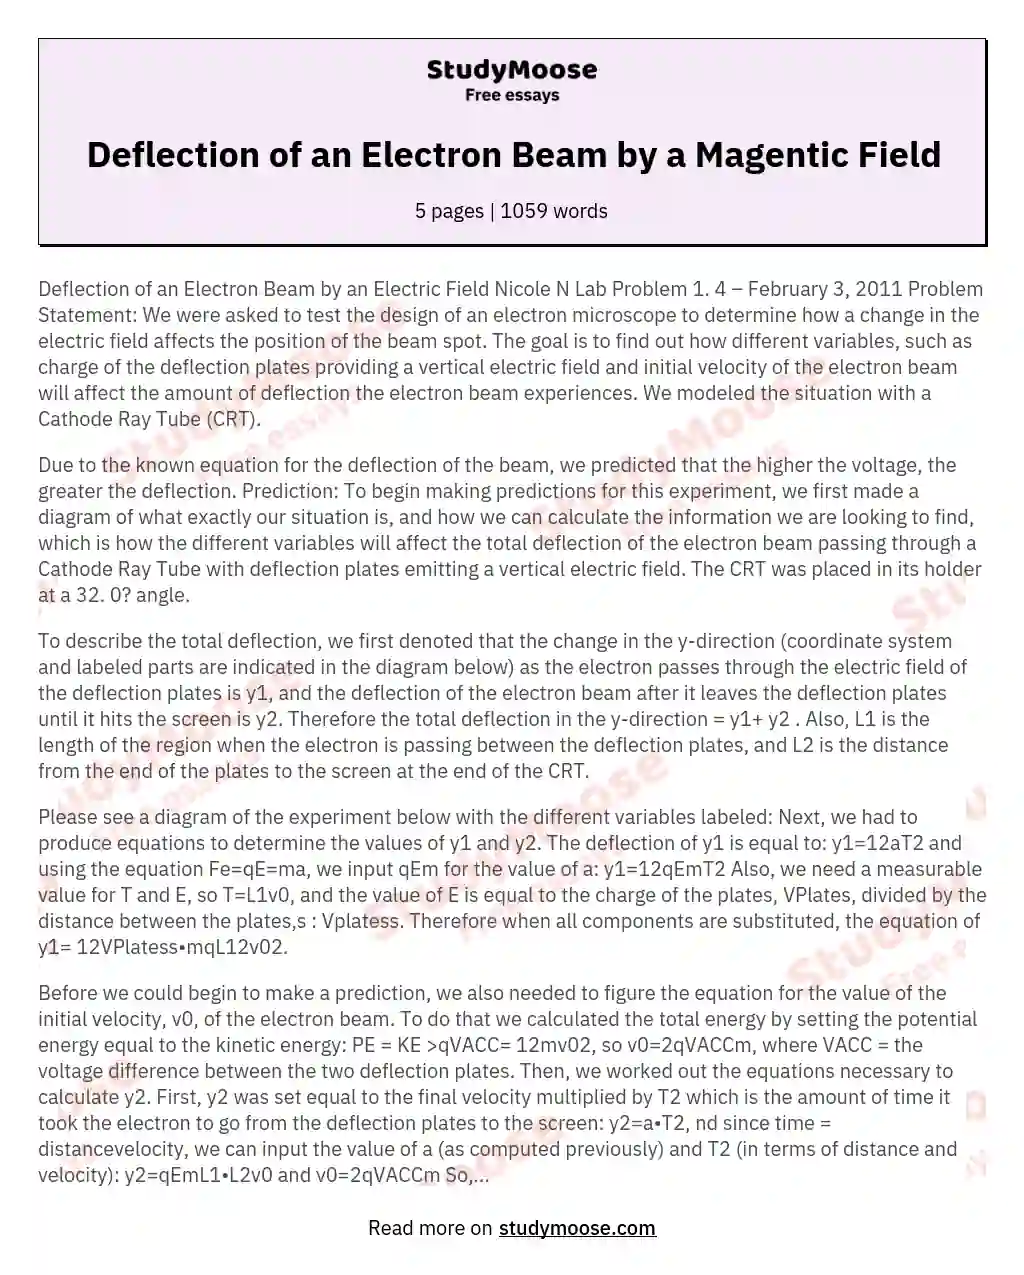 Deflection of an Electron Beam by a Magentic Field essay